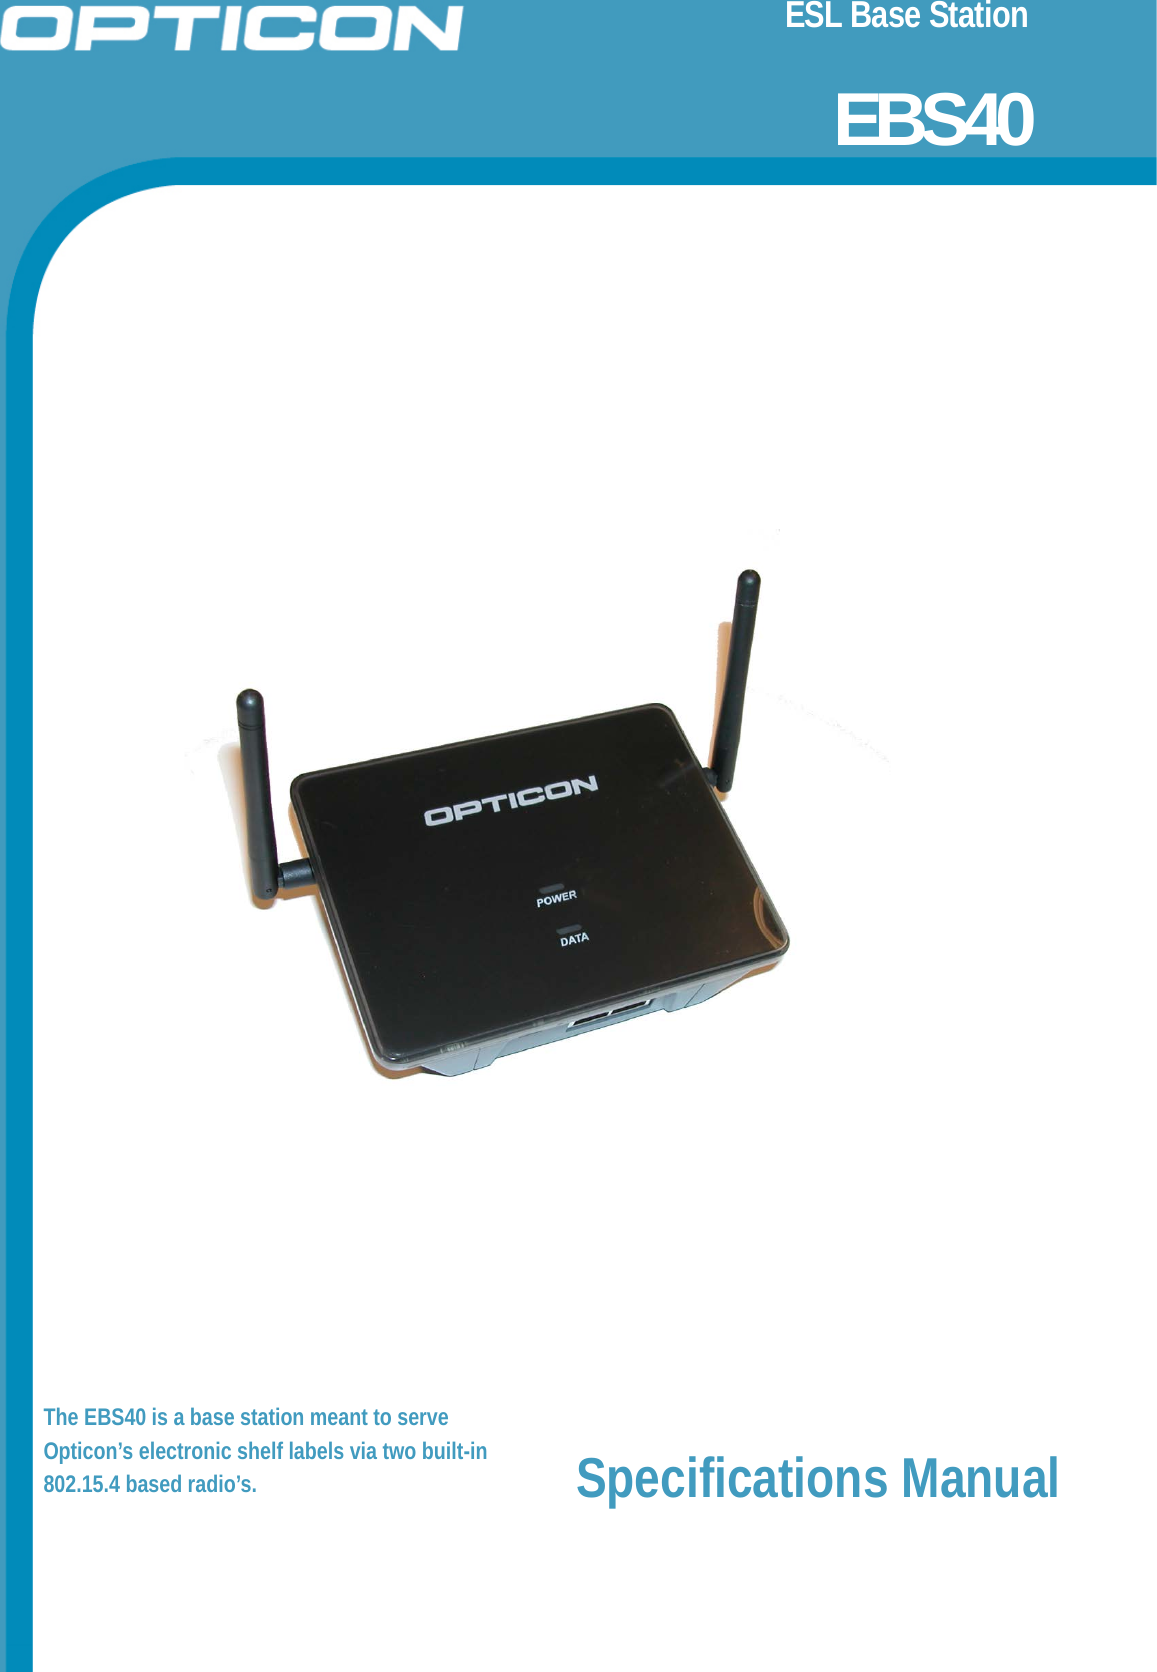 ESL Base Station                        EBS40               The EBS40 is a base station meant to serve Opticon’s electronic shelf labels via two built-in 802.15.4 based radio’s.  Specifications Manual   